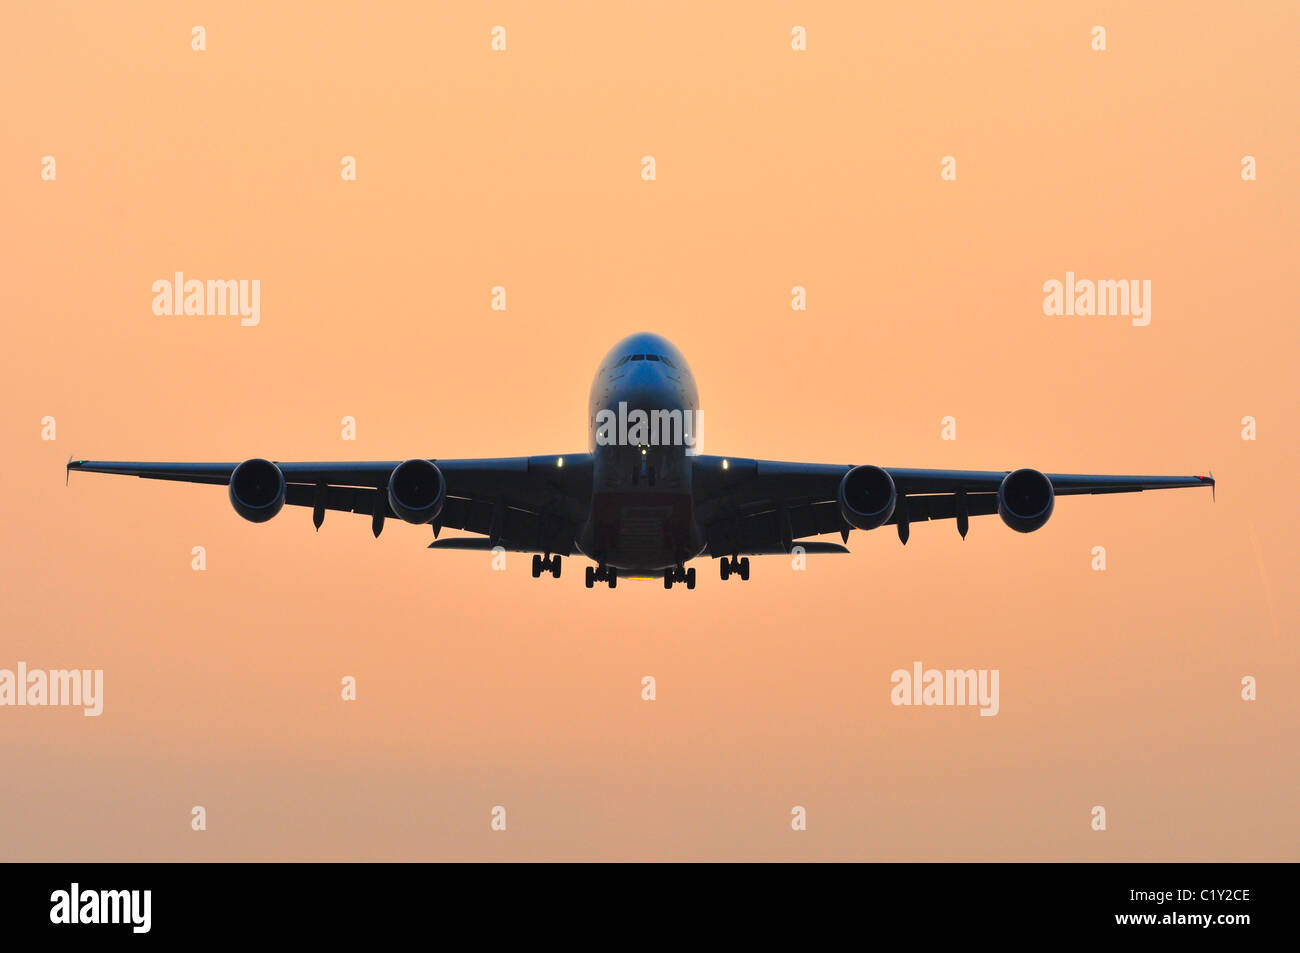 Airbus A380 Airplane coming into Land during sunset at Heathrow Airport Stock Photo